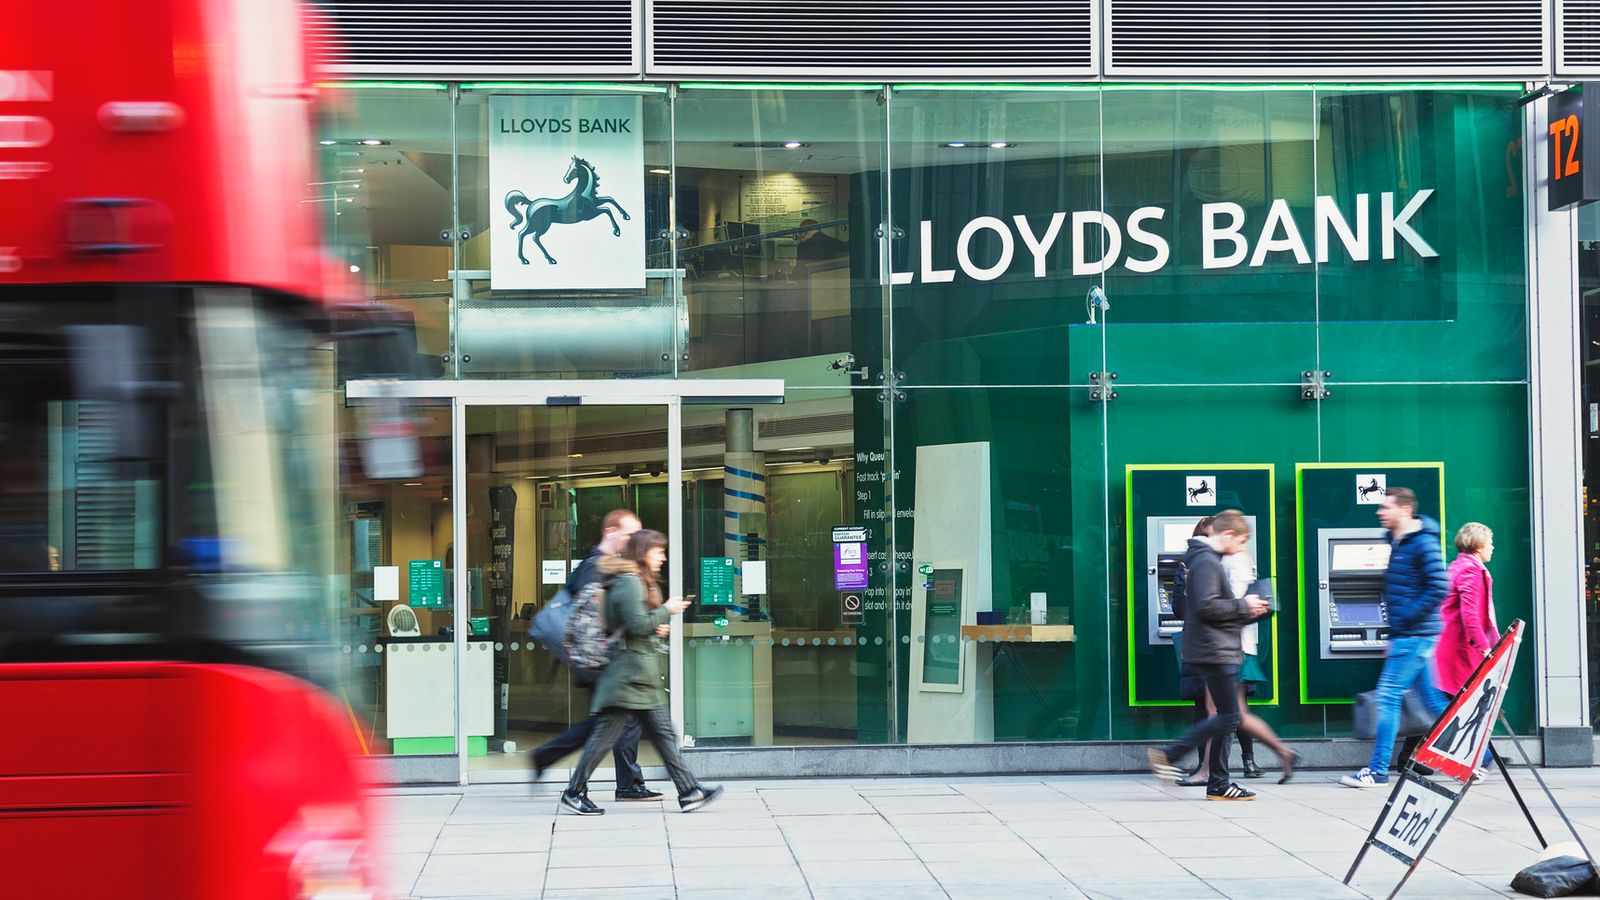 Lloyds banks record profits but sets aside £450m to cover car finance probe